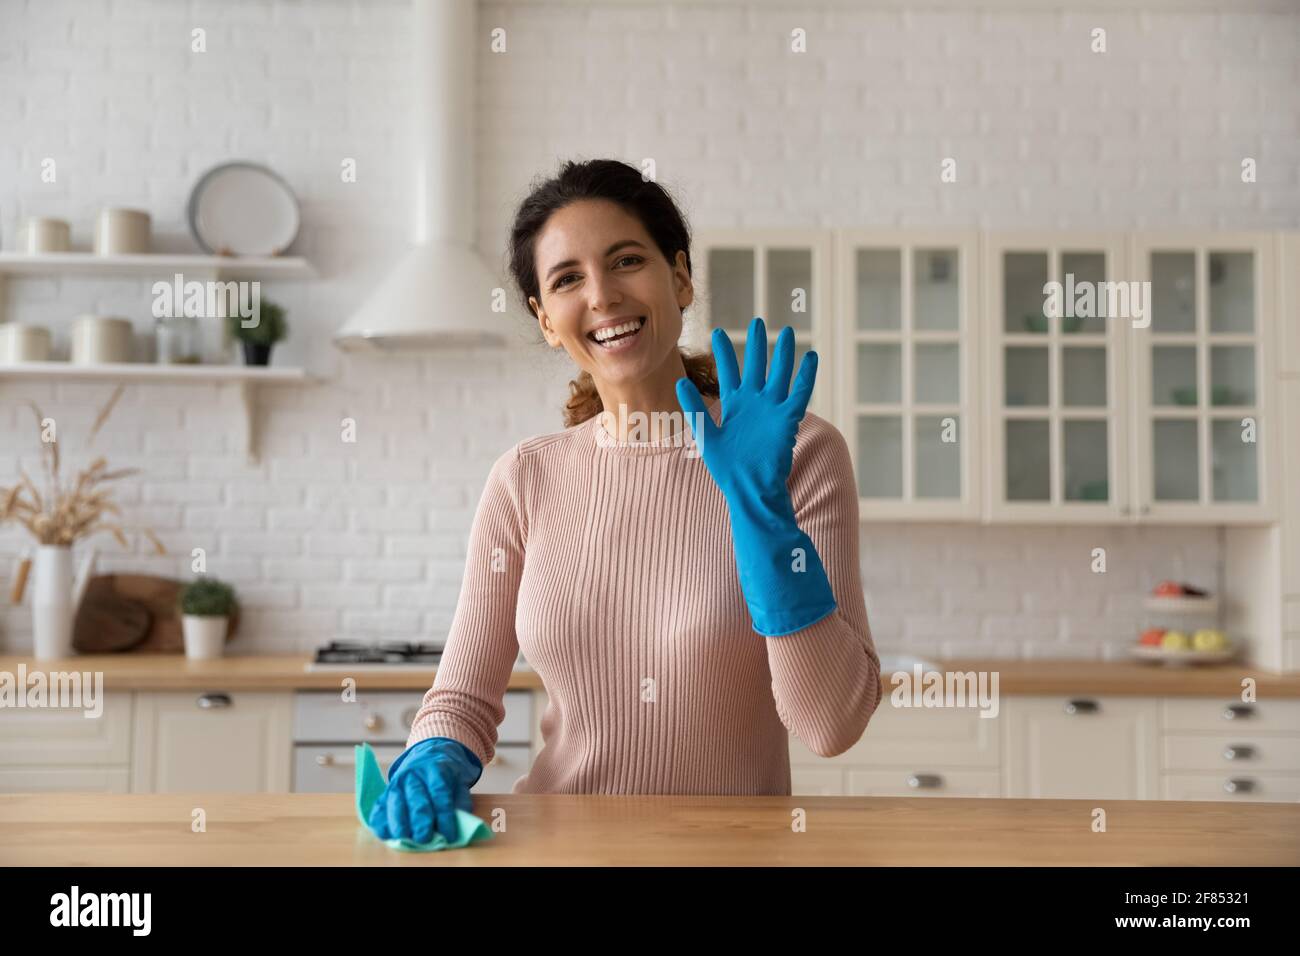 Portrait of smiling female vlogger advertizing new home cleaning products Stock Photo